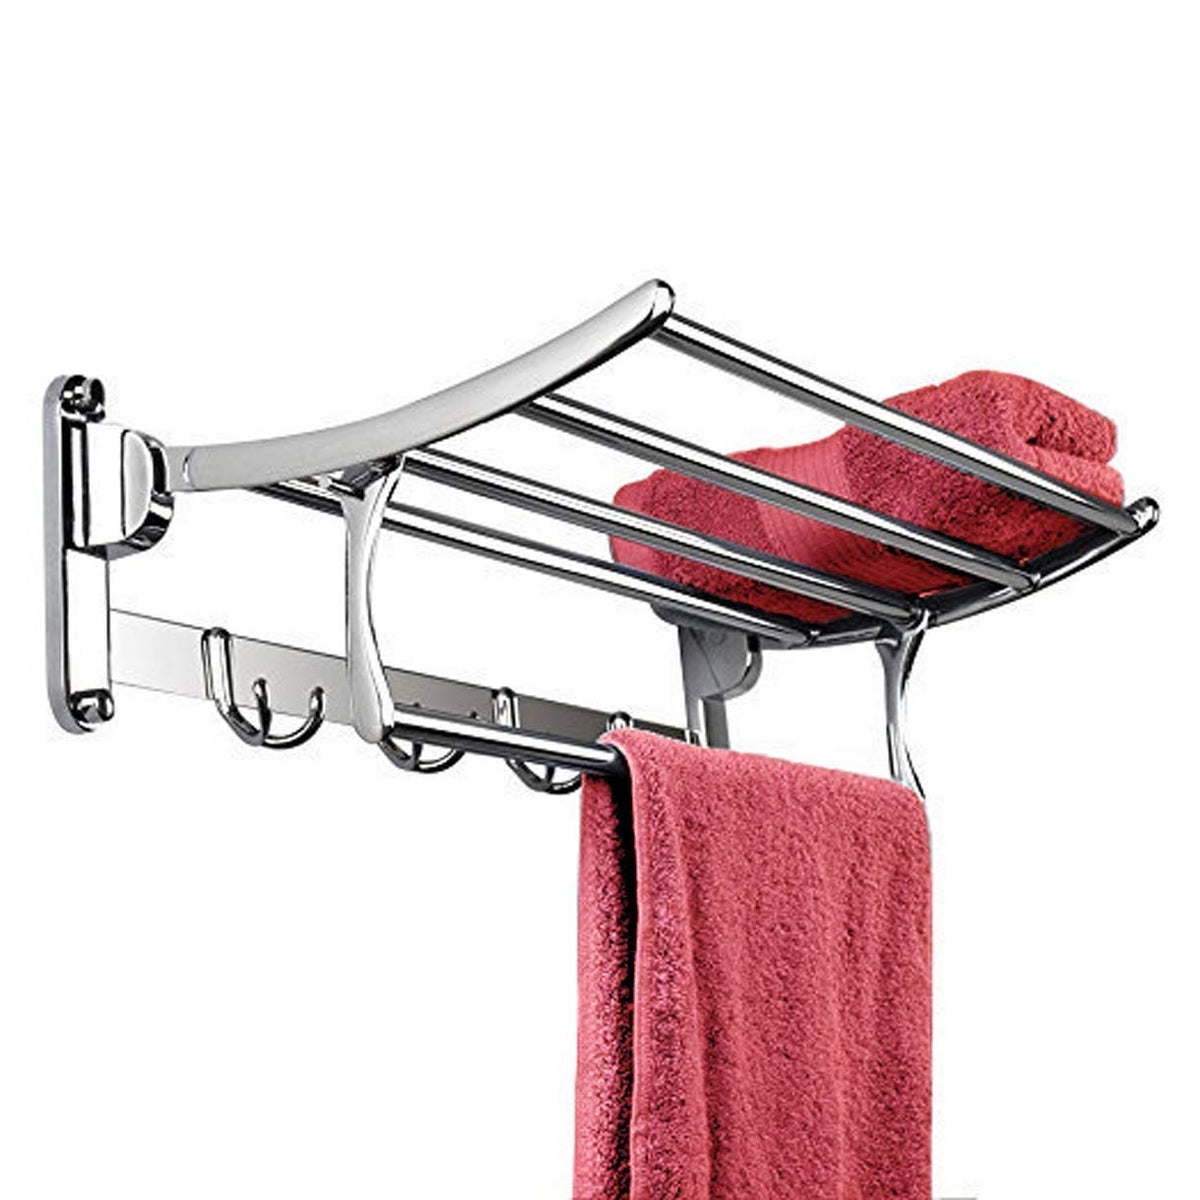 Plantex Gold Stainless Steel Folding Towel Rack for Bathroom/Towel Stand(24 Inch-Chrome Finish)